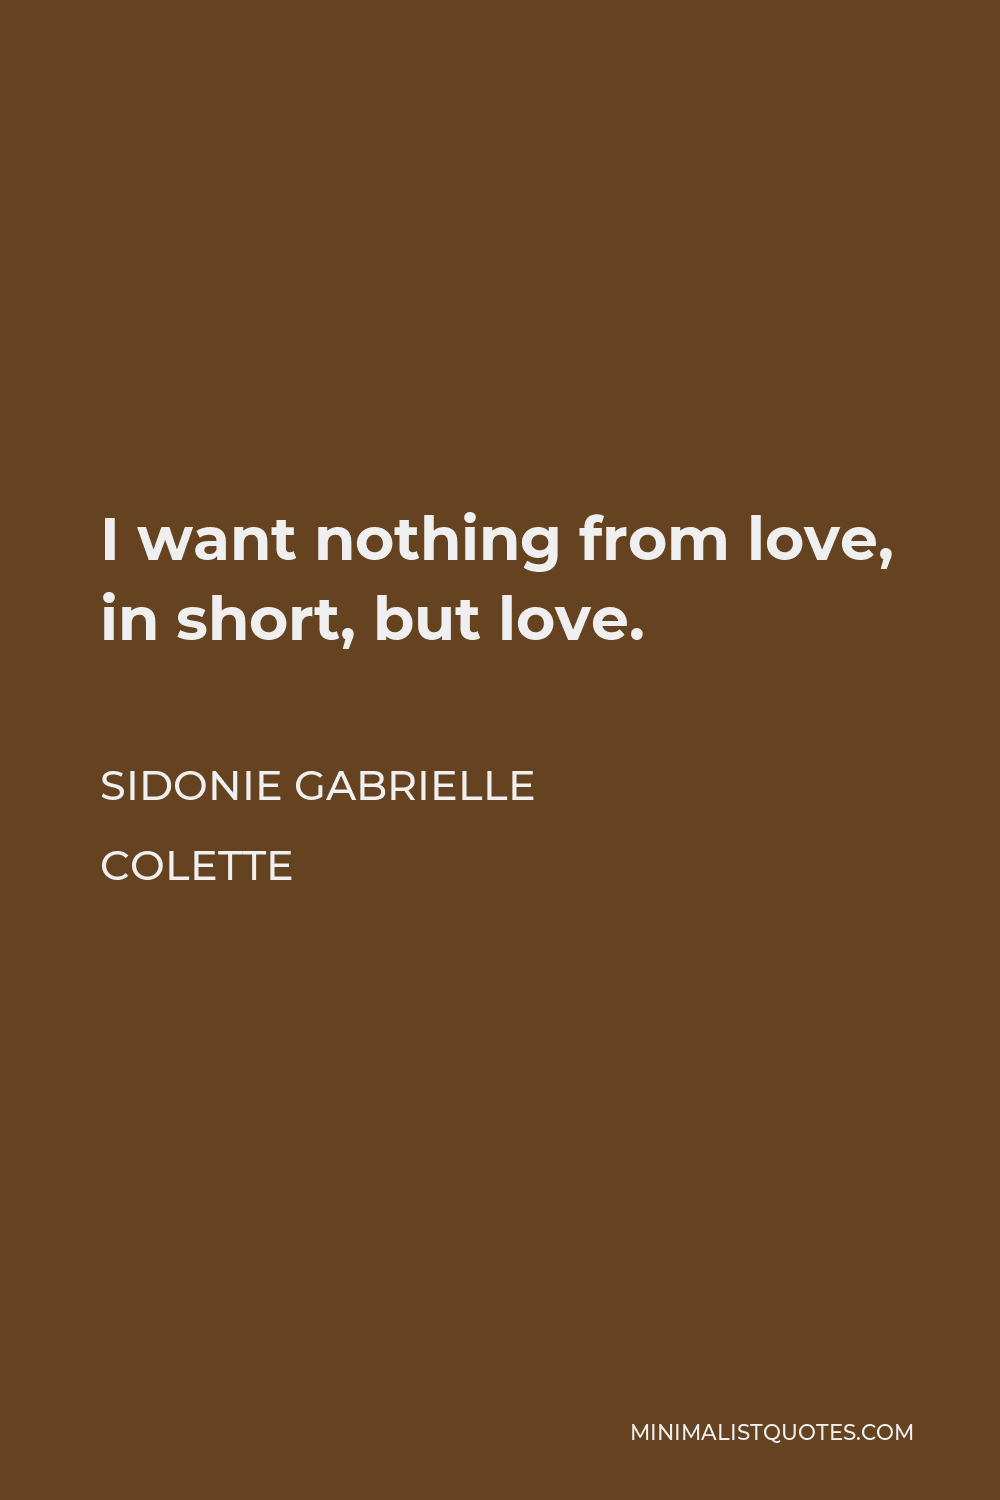 Sidonie Gabrielle Colette Quote - I want nothing from love, in short, but love.